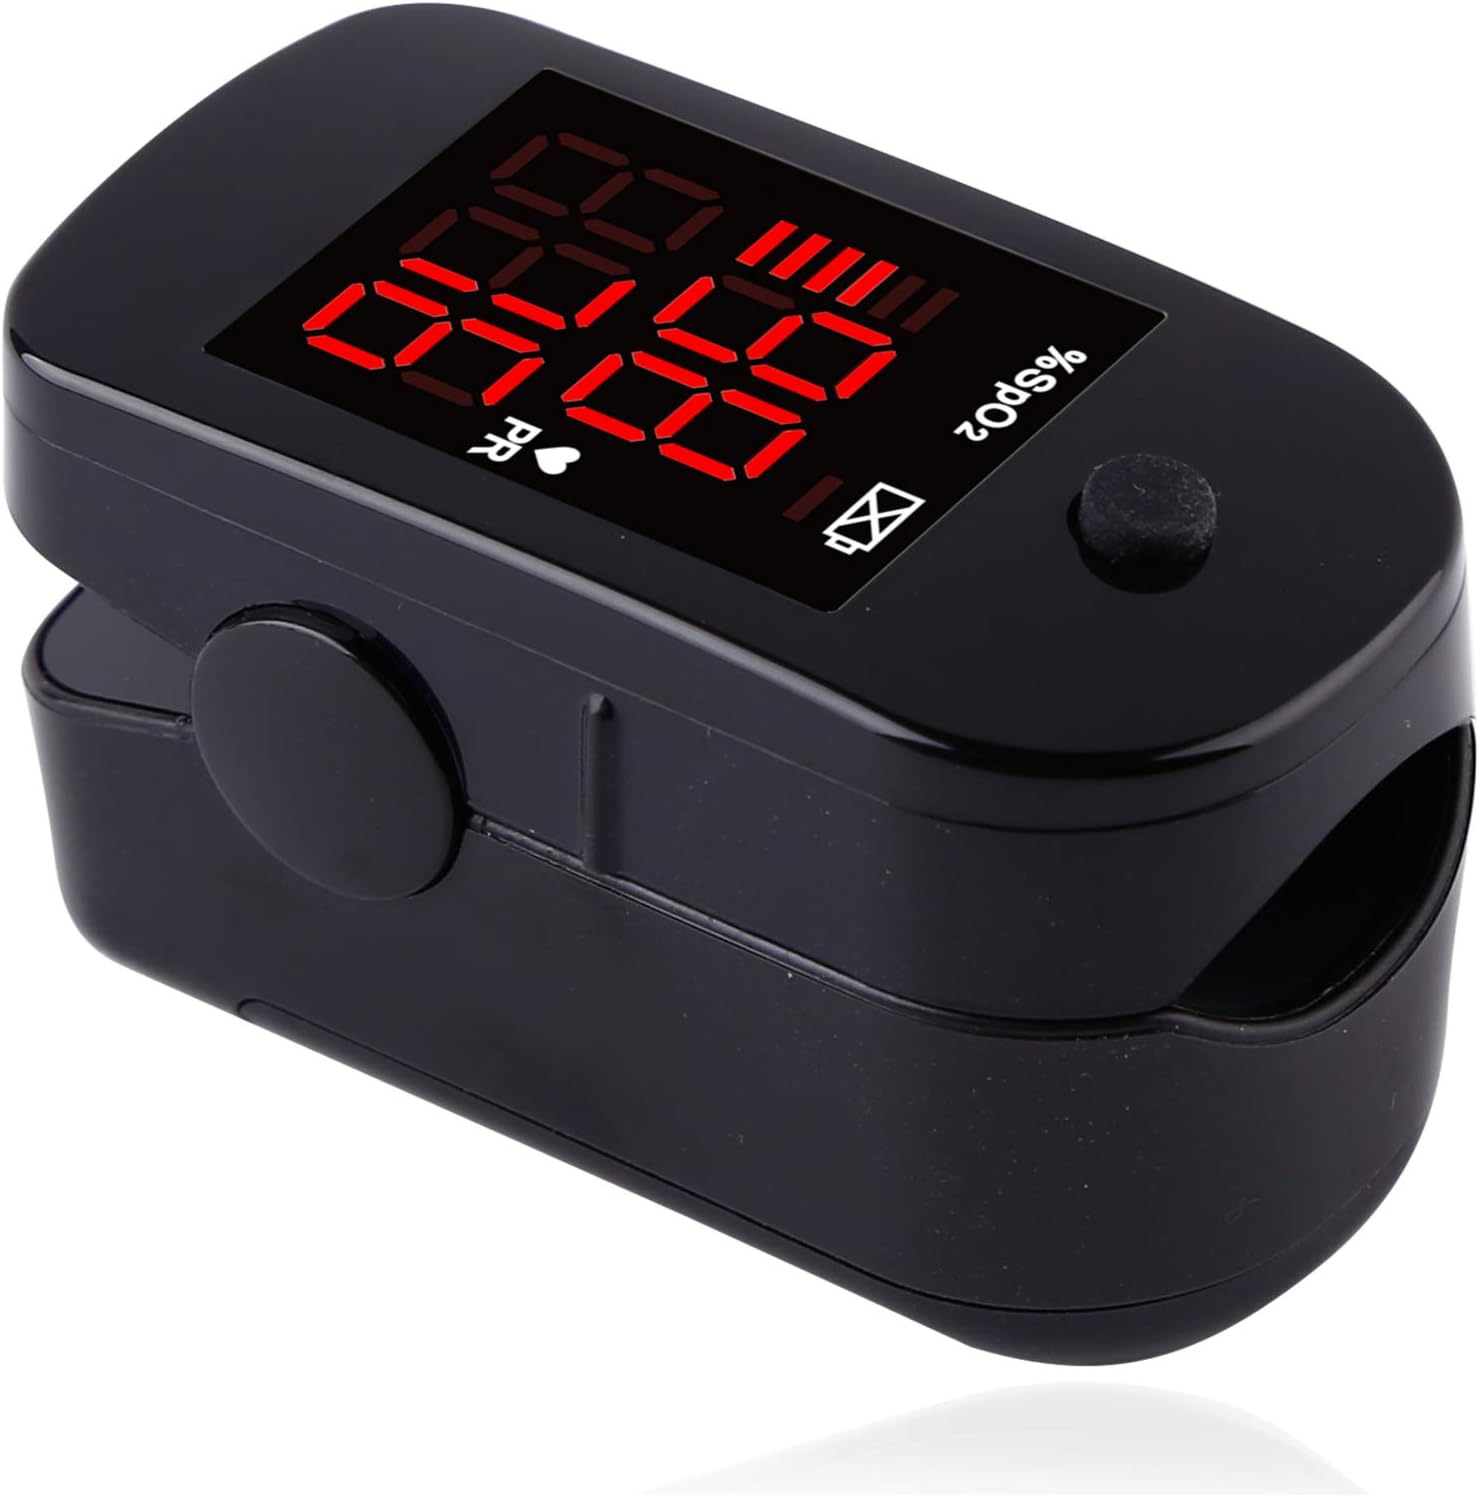 Black Finger Pulse Oximeter - Blood Oxygen Saturation Monitor Great as SPO2 Pulse Oximeter - Portable Oxygen Sensor with Included Batteries - O2 Saturation Monitor